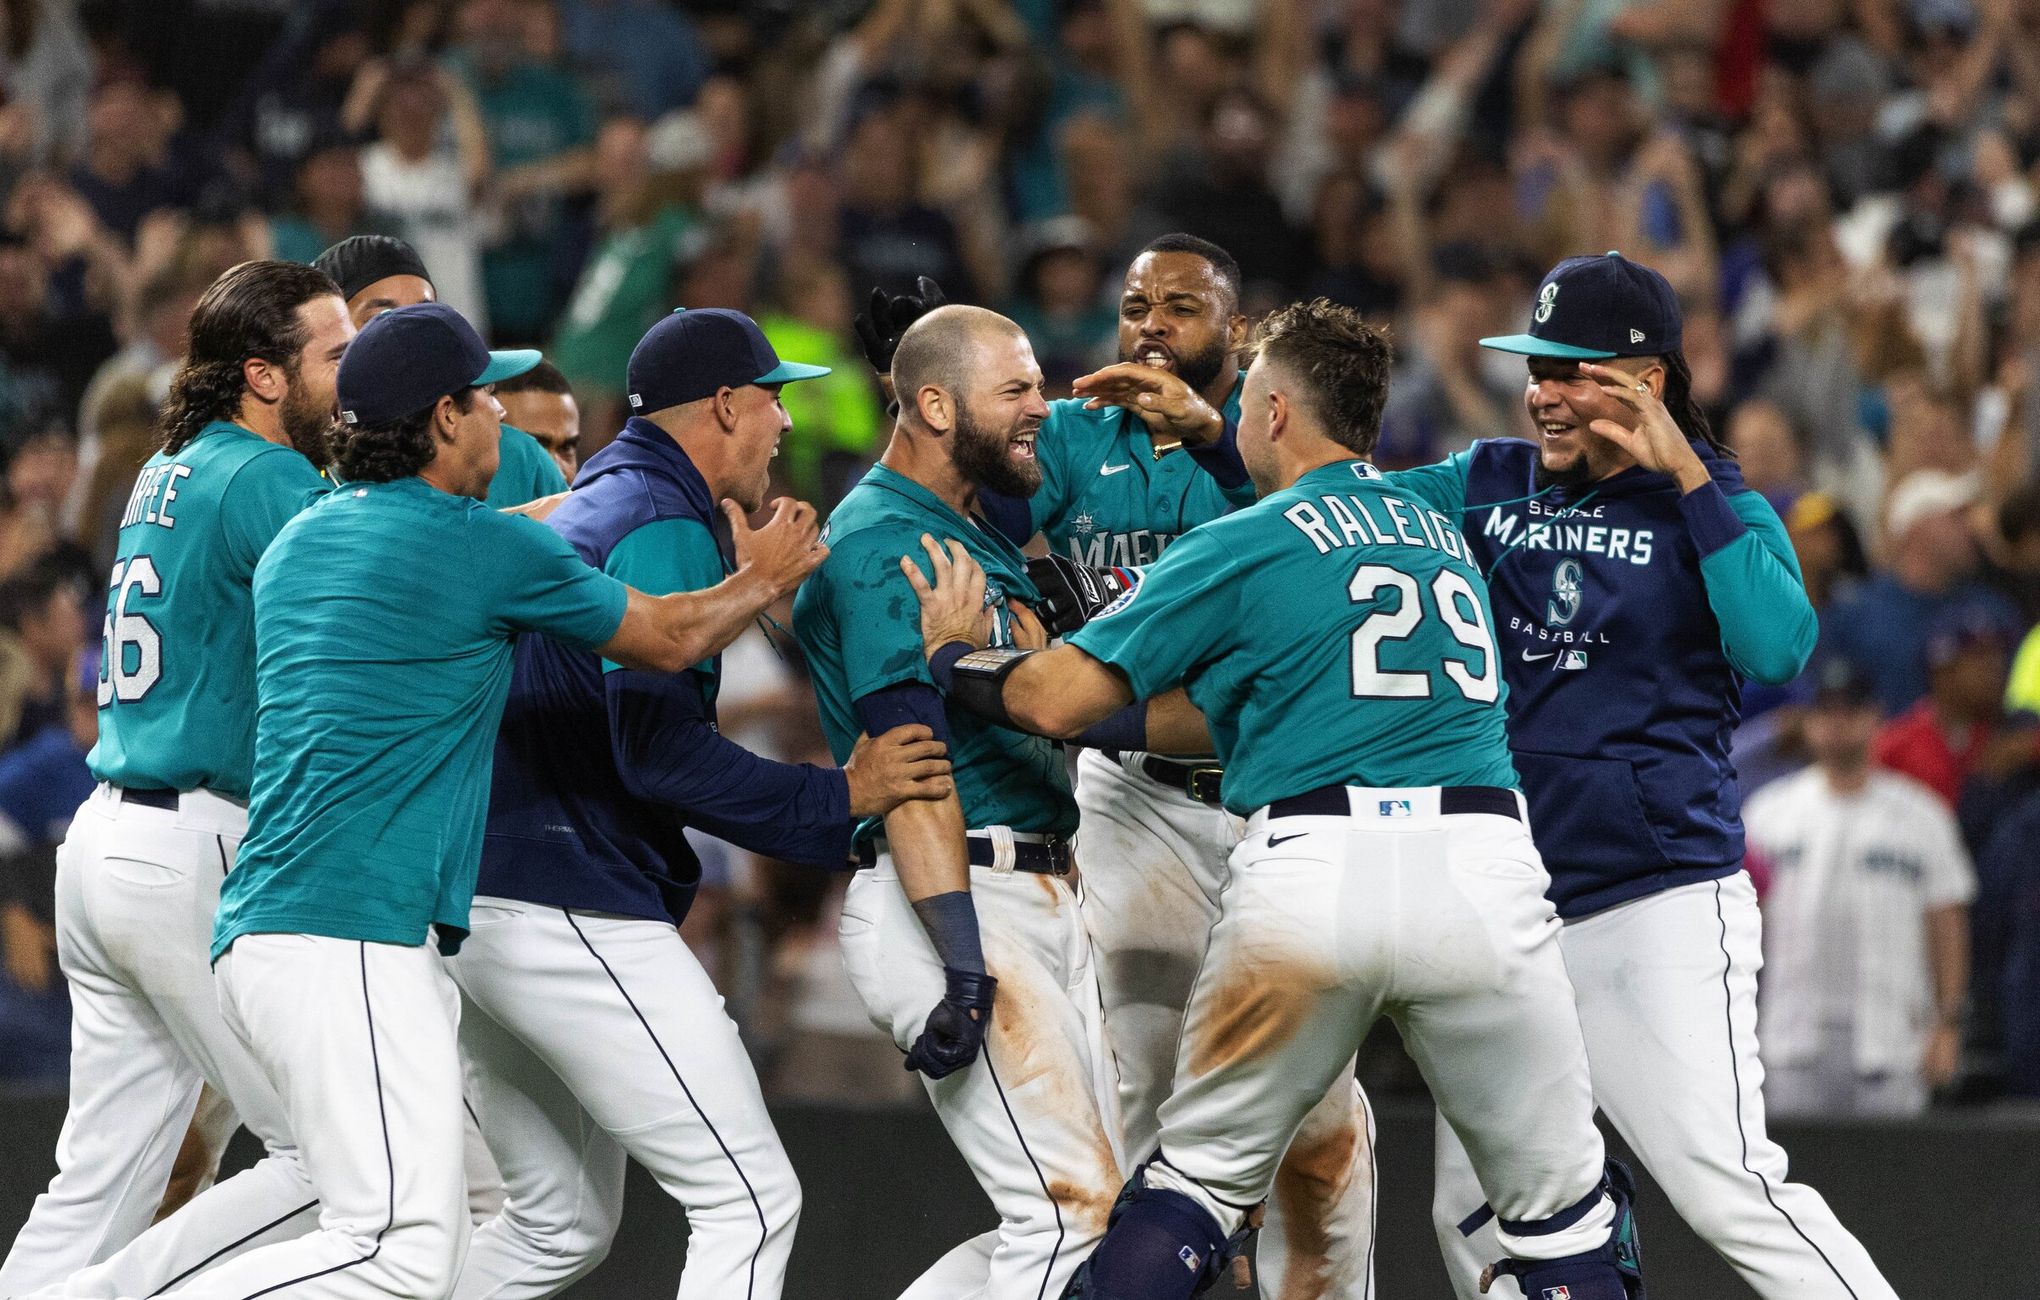 Mariners are team to root for in playoffs